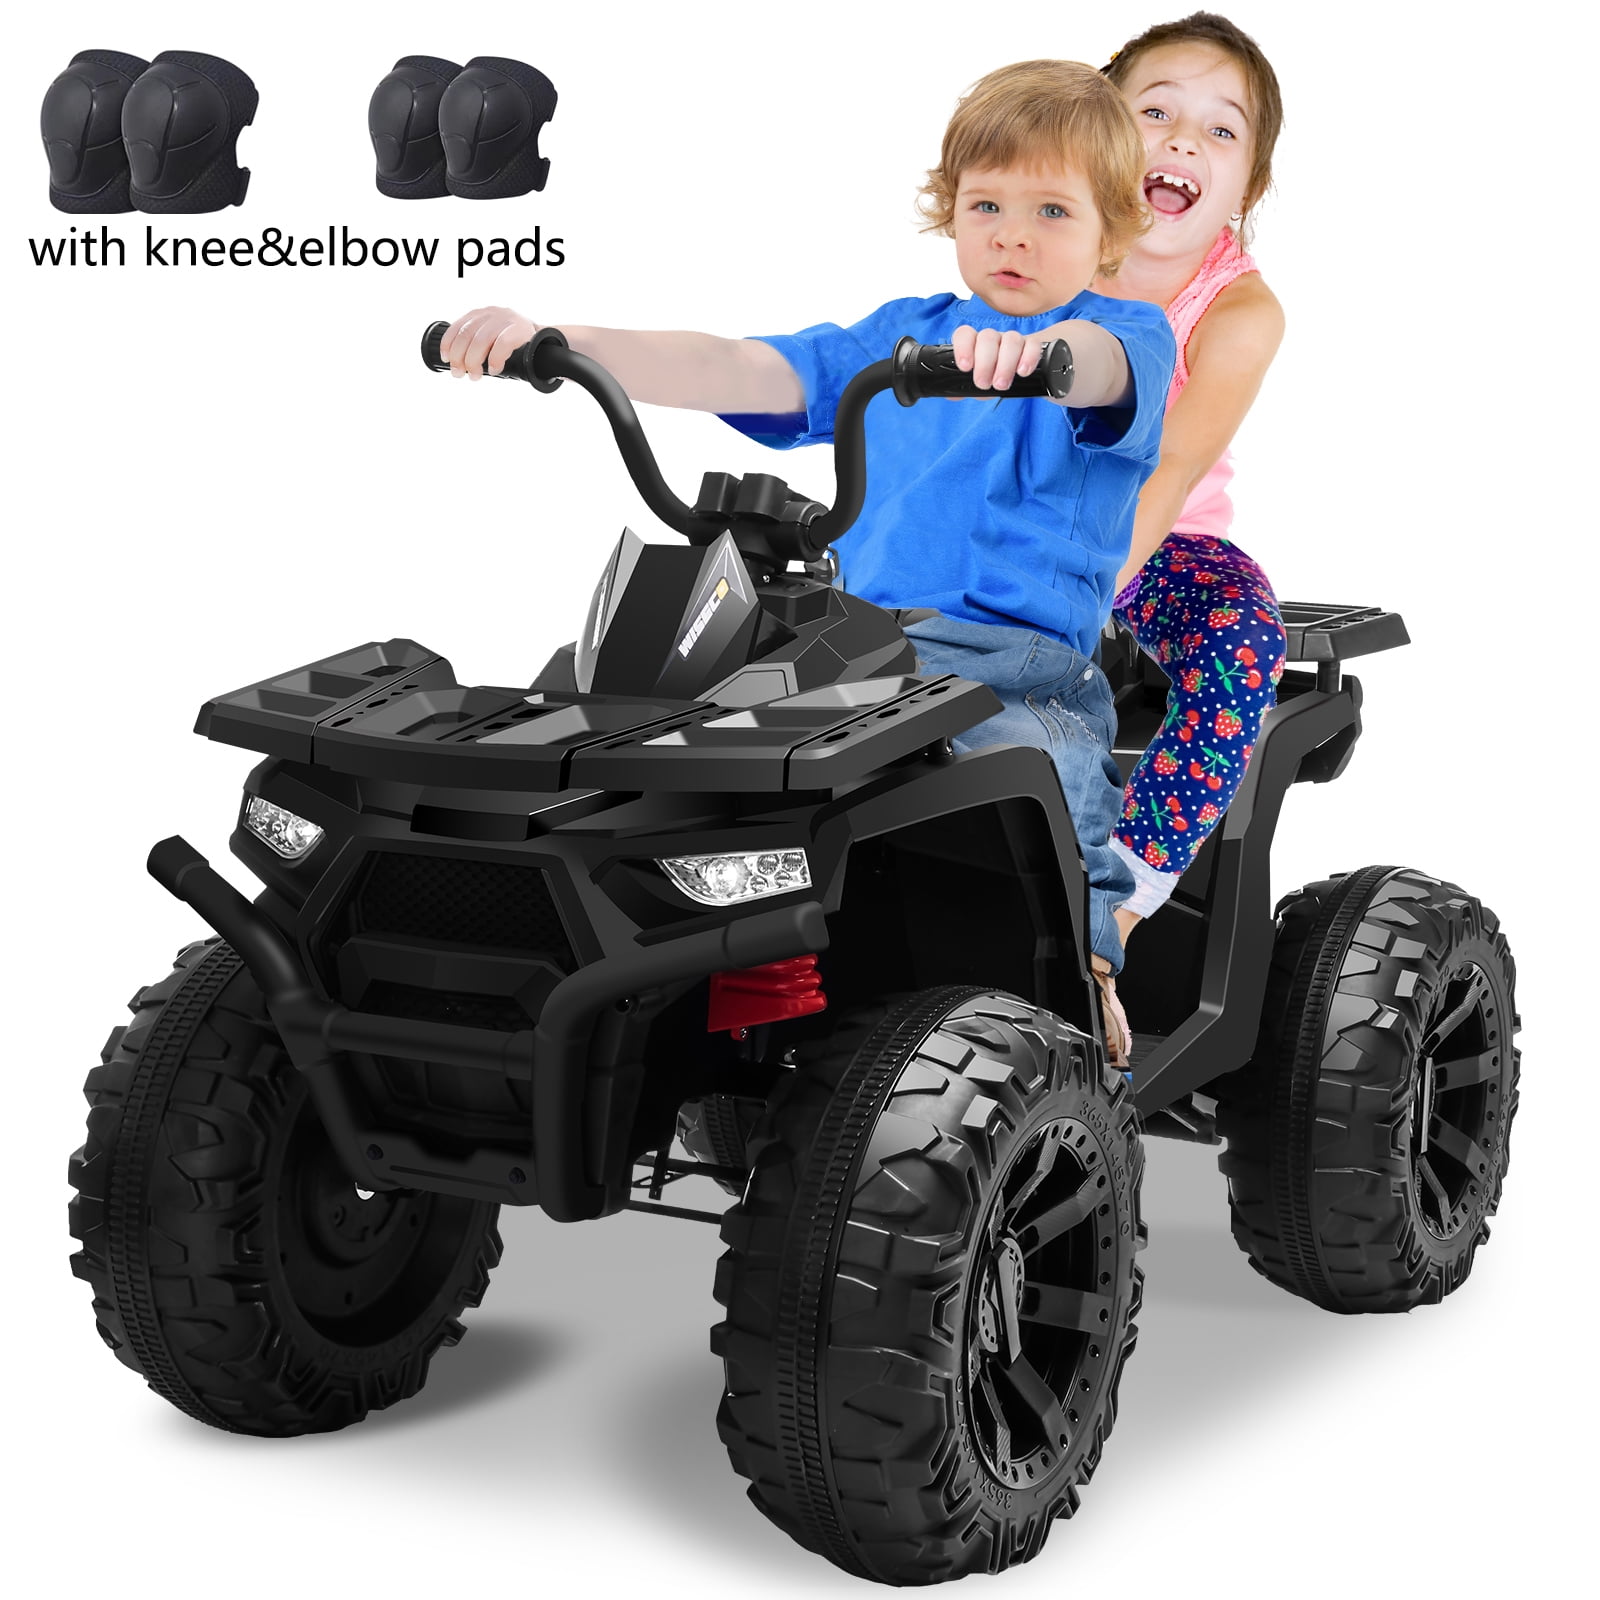 Joyracer 24V Kids Ride on ATV with 2 Seater, 2* 200W Motor 9AH Battery Powered Electric Car w/ LED Lights, High & Low Speed, Music, Suspension, 24 Volt Ride on Toy 4 Wheeler Quad for Boys Girls,Black